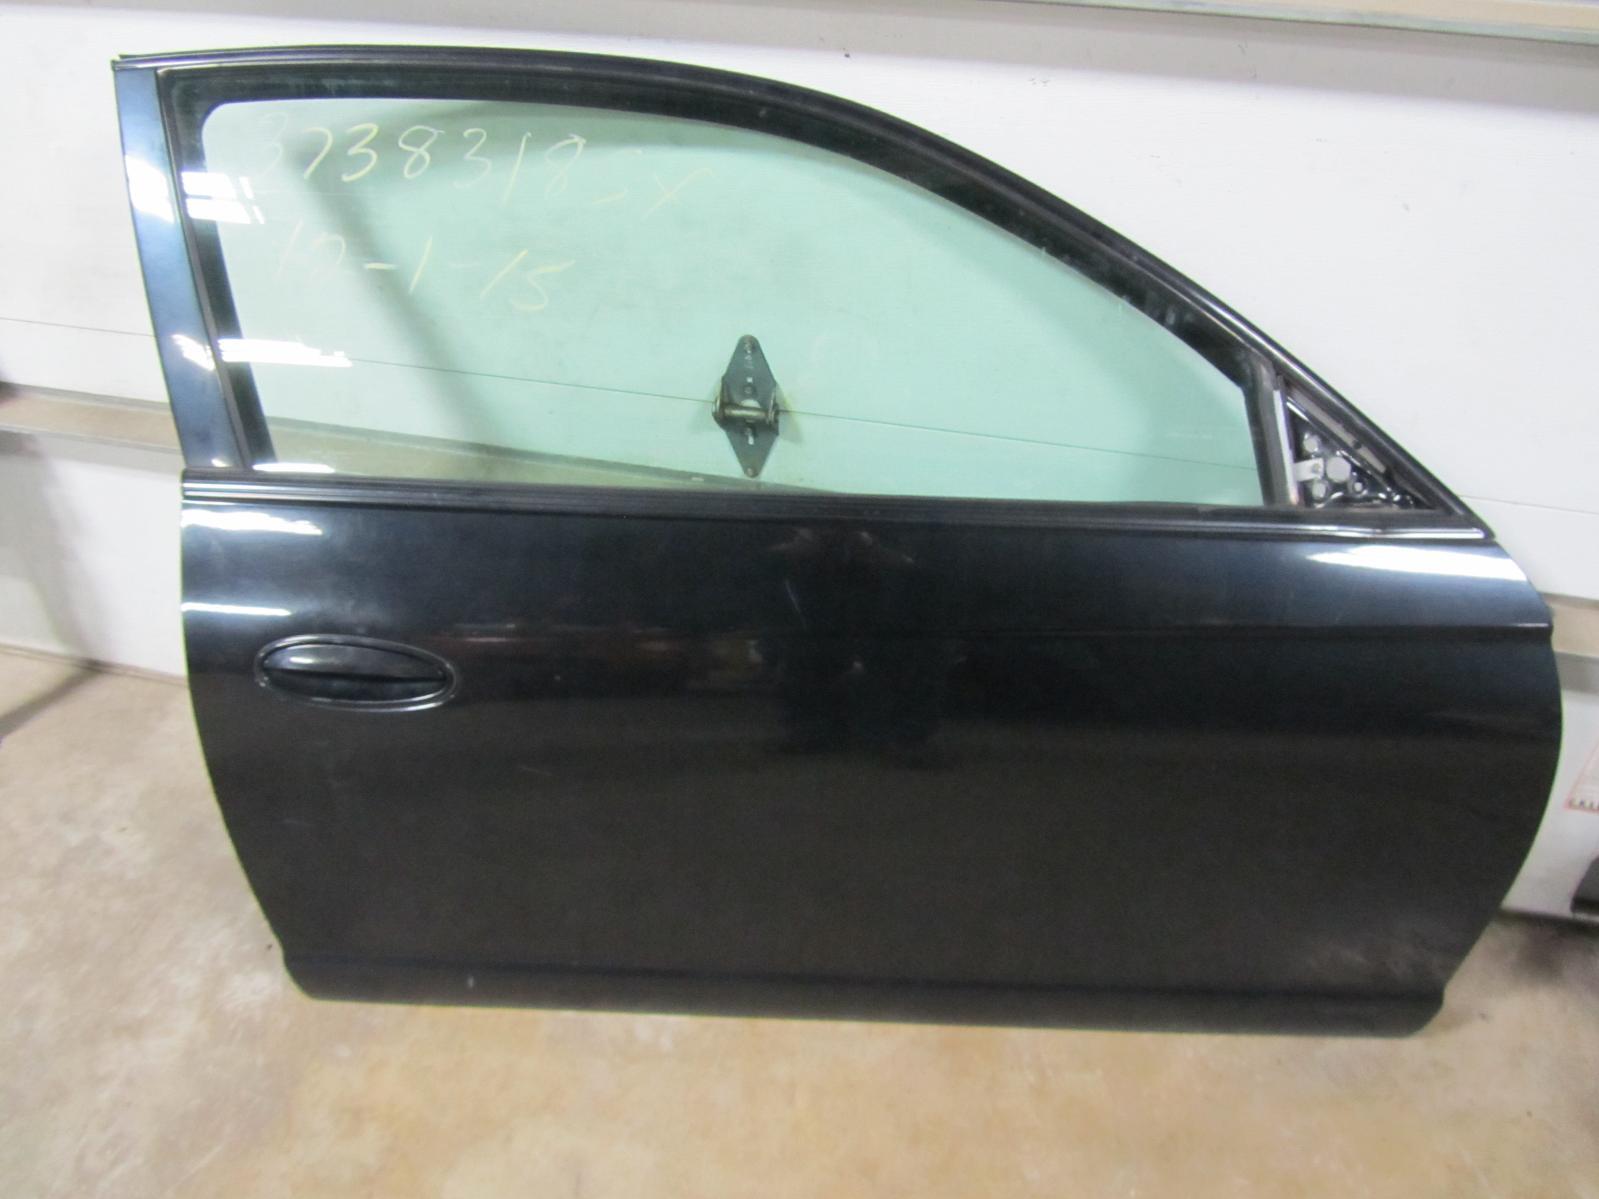 00-07 CHEVROLET MONTE CARLO R Front w Mouldin Door Portland Mall Passenger Excellence o